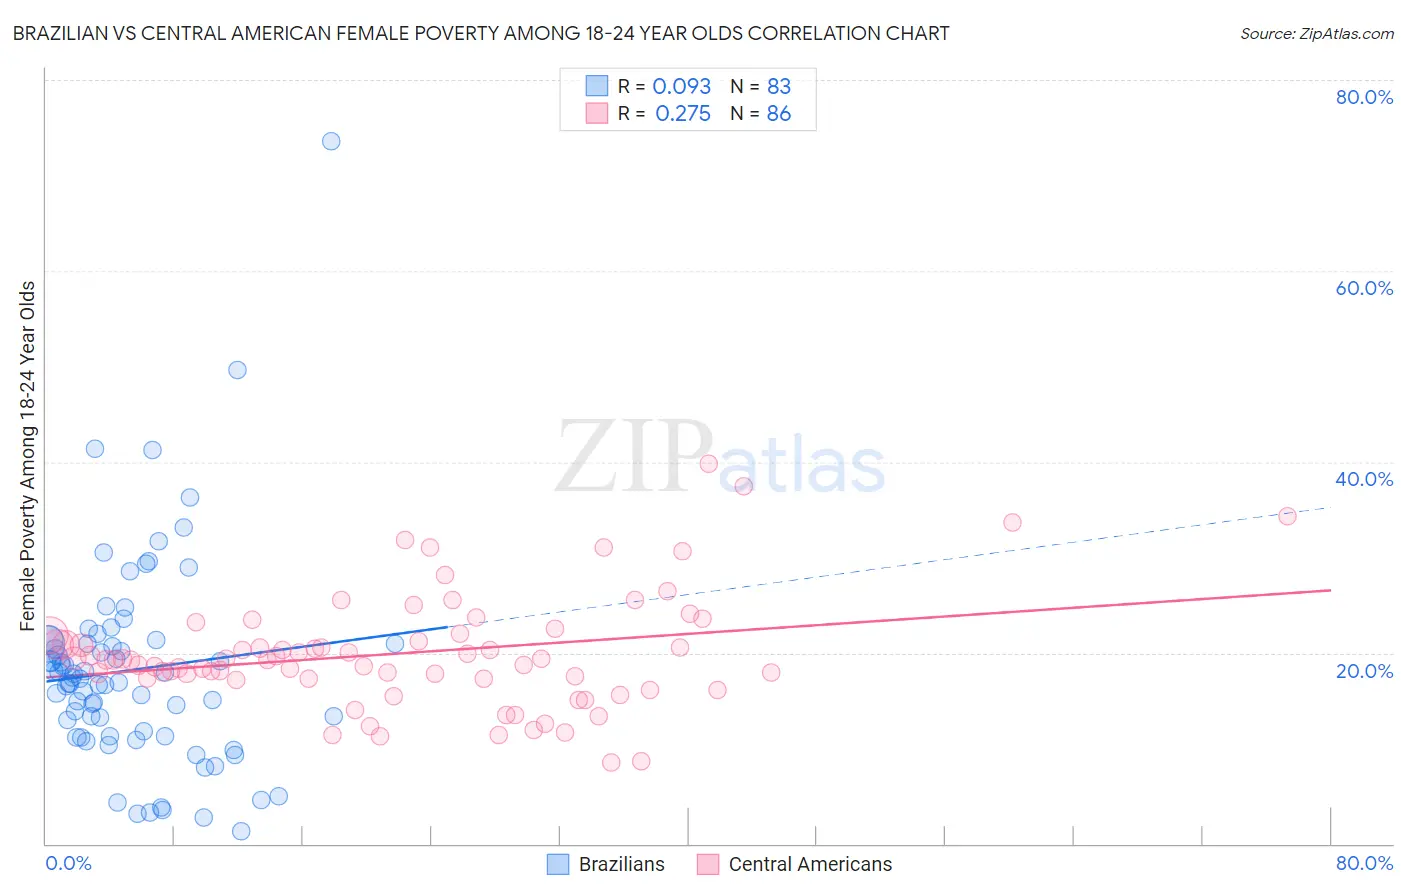 Brazilian vs Central American Female Poverty Among 18-24 Year Olds